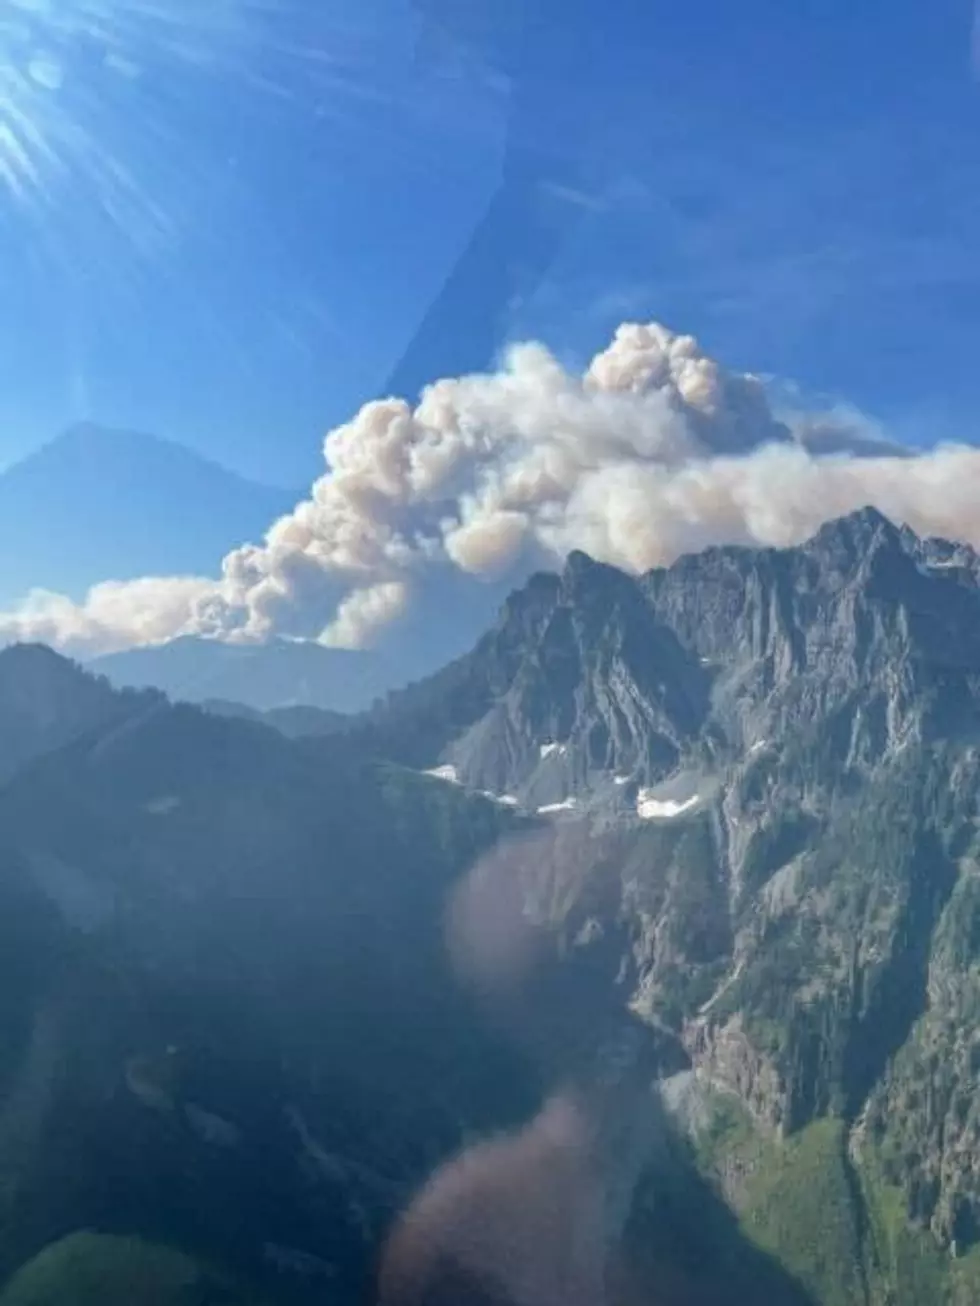 Lake Wenatchee Fires Expected to Produce More Smoke